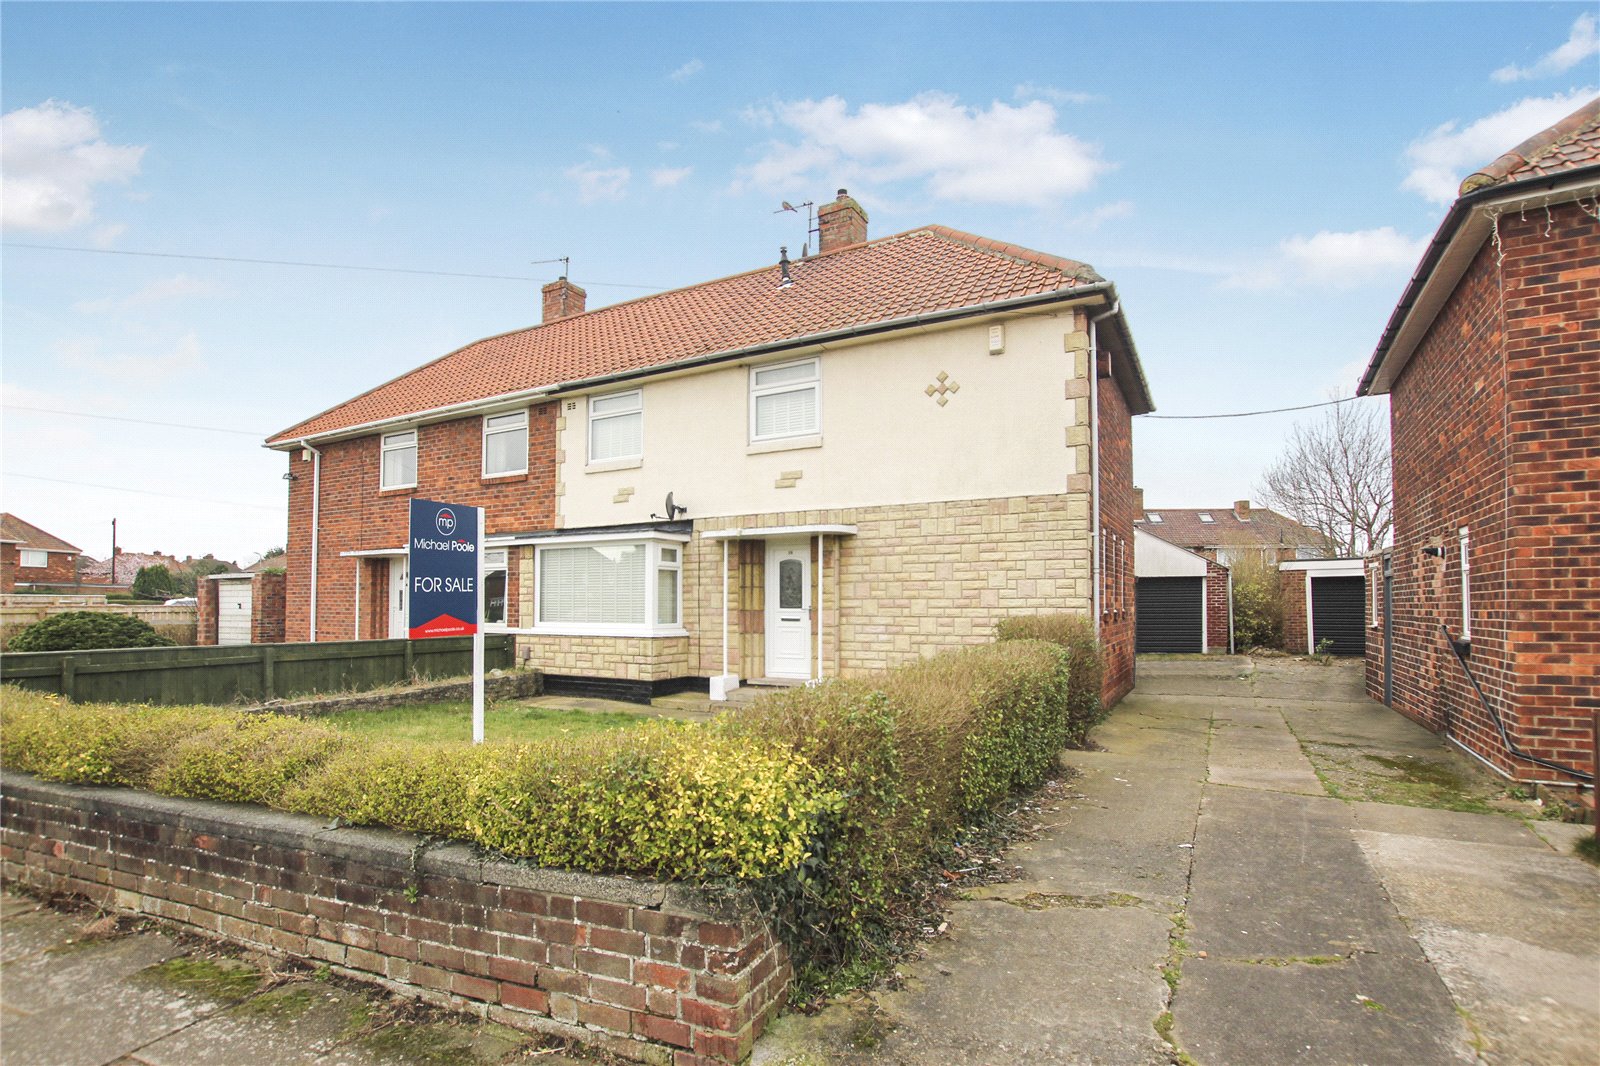 3 bed house for sale in Pemberton Crescent, Beechwood 1